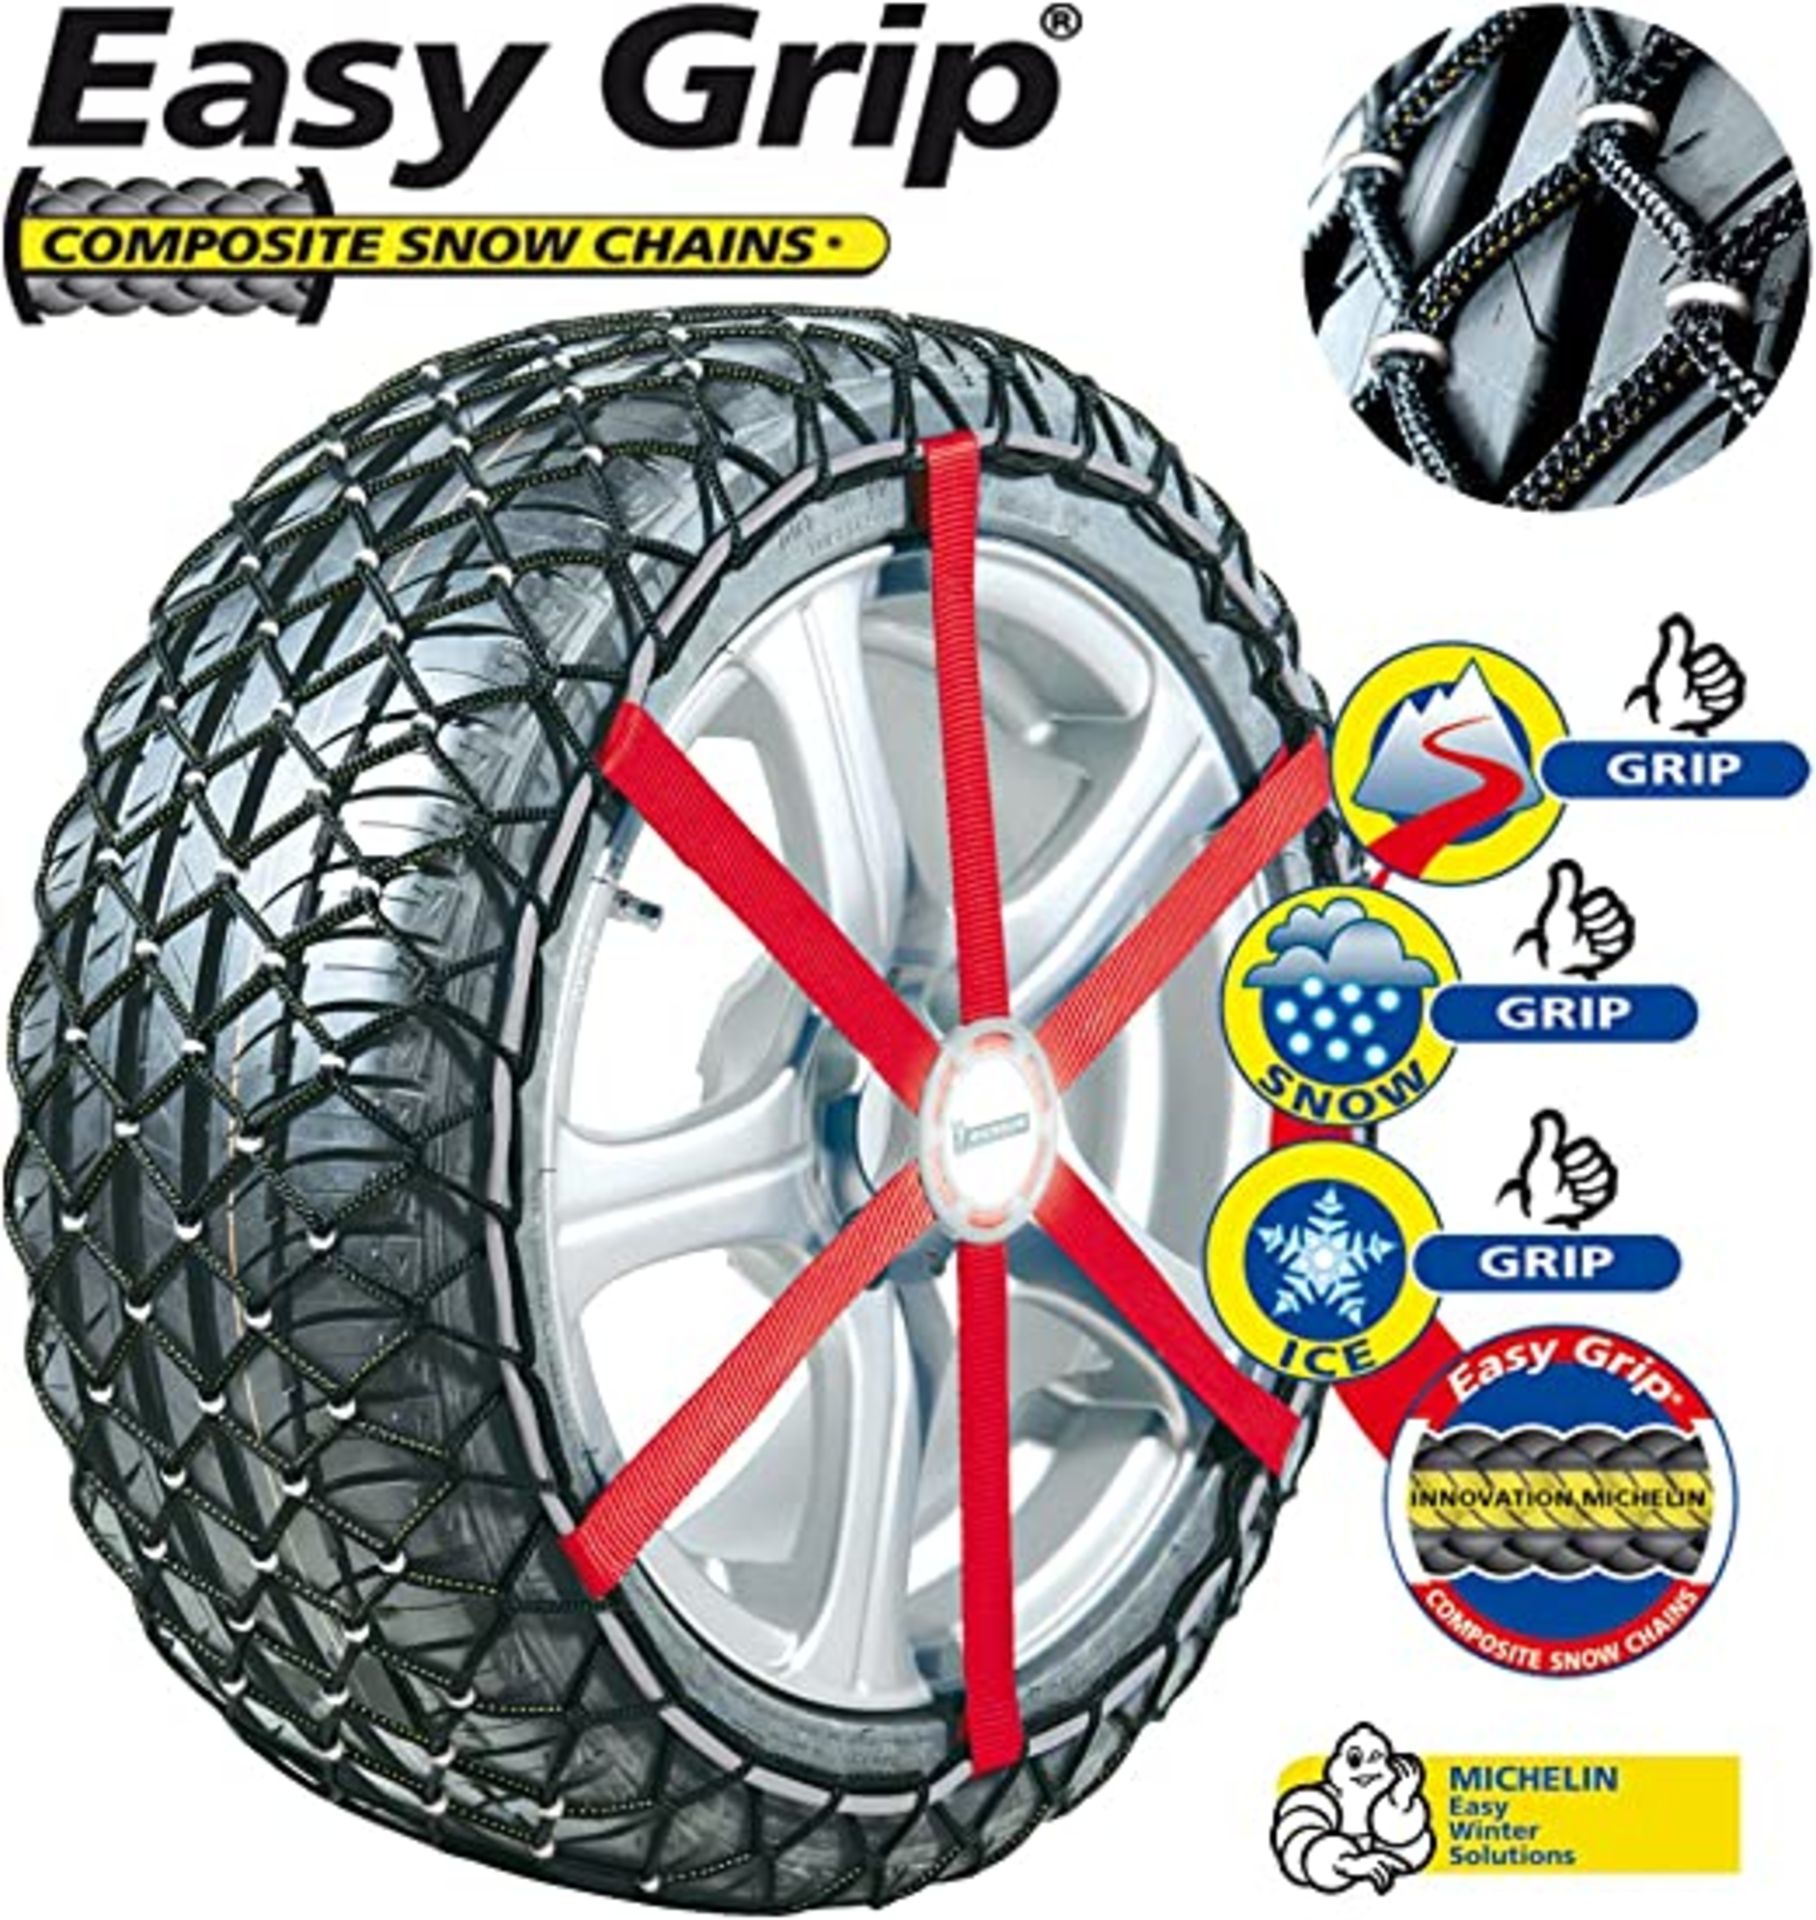 5 X NEW PACKAGED SETS OF Michelin 92302 Textile snow chains Easy Grip J11, ABS and ESP compatible, - Image 3 of 3